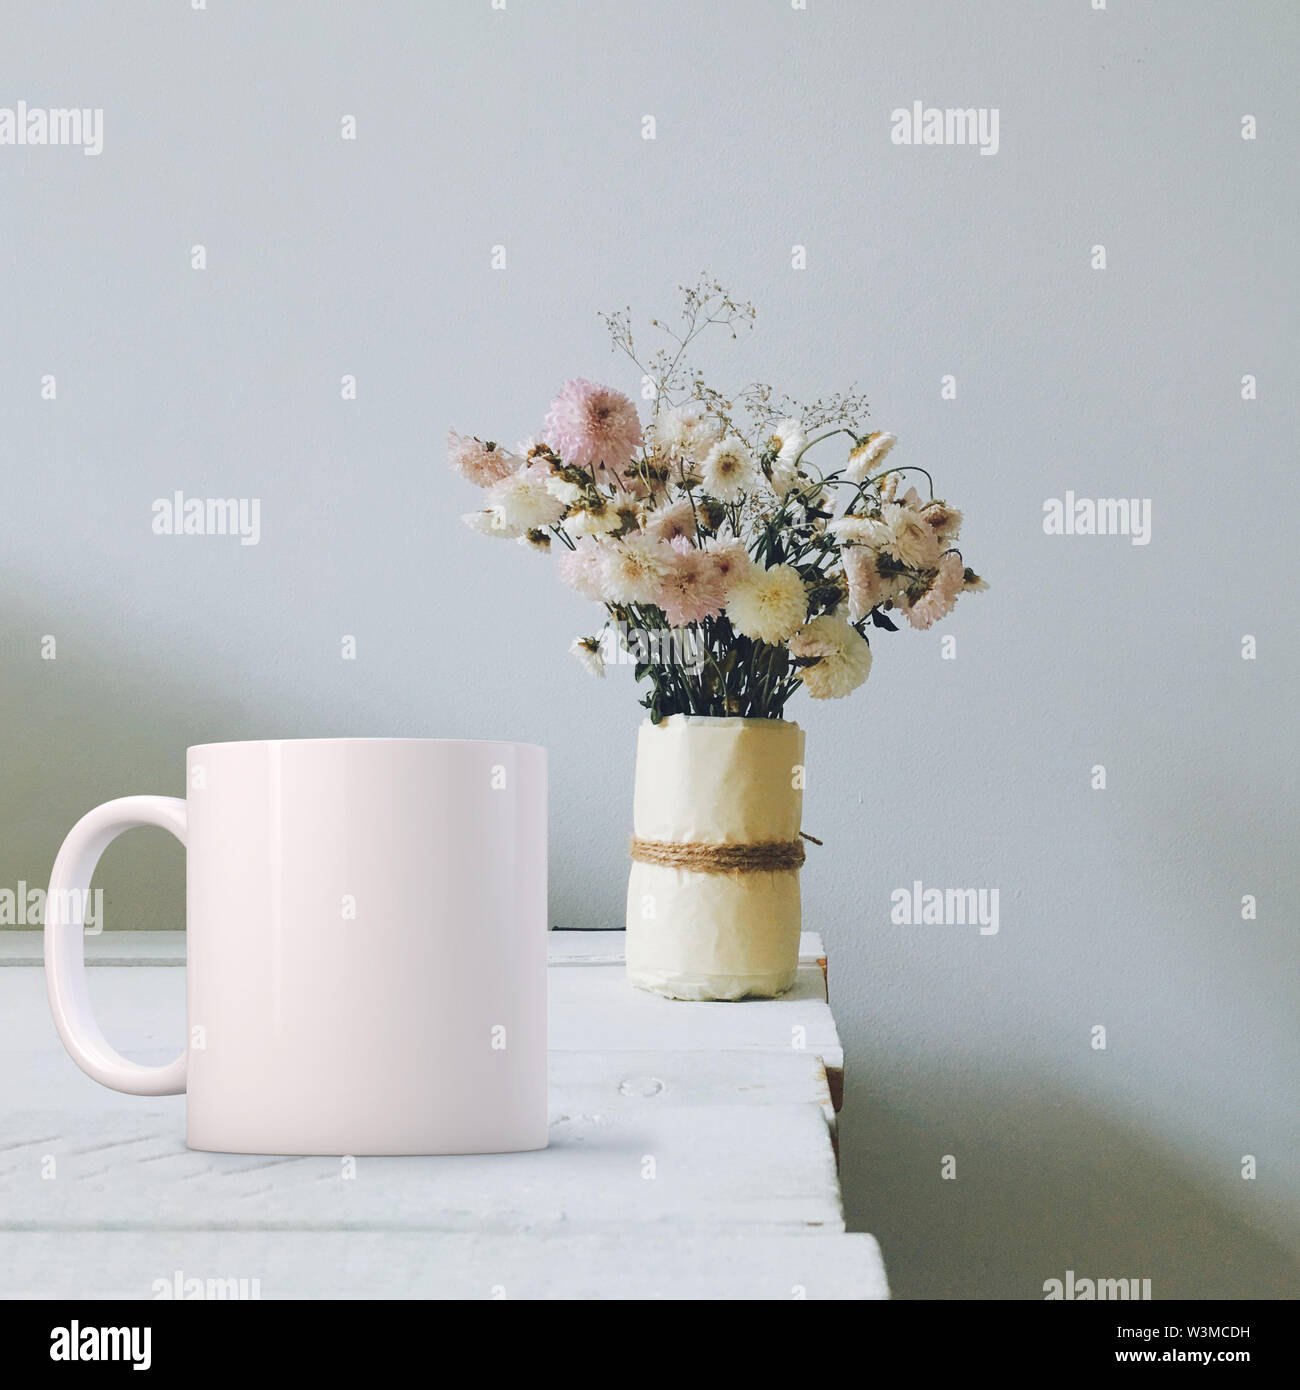 White Mug Mockup. Perfect for businesses selling mugs, just overlay your quote or design on to the image. Stock Photo